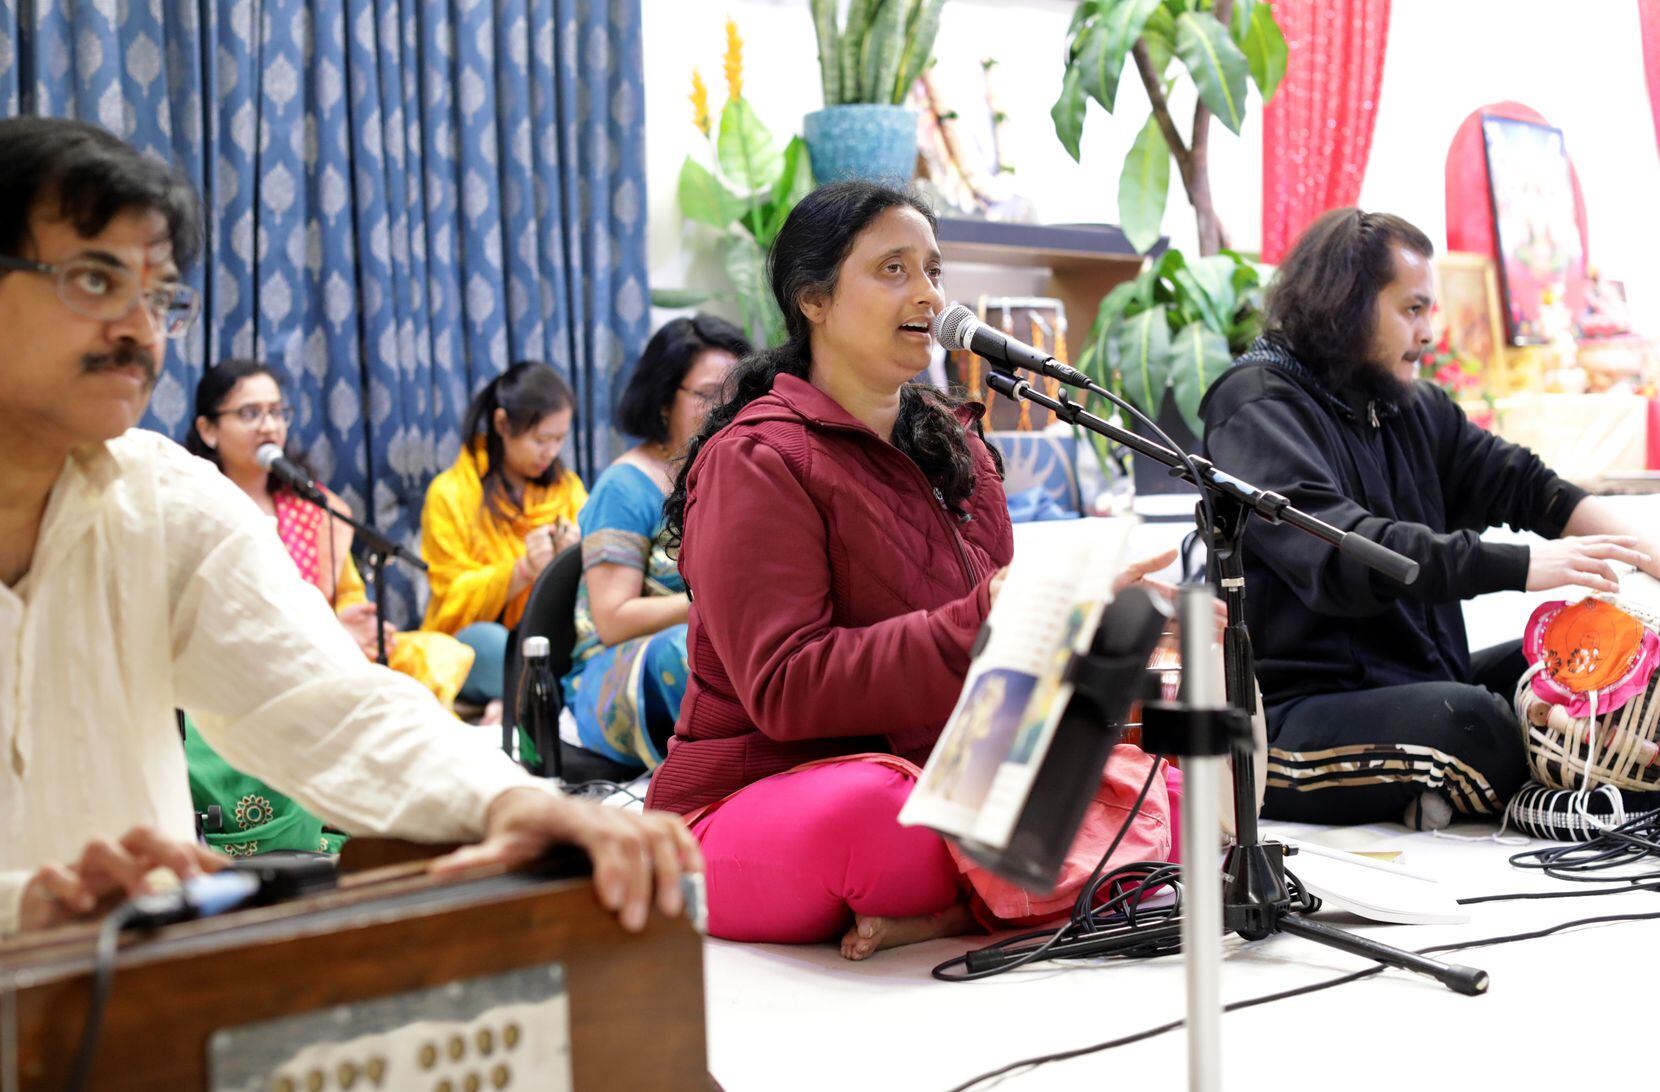 Community members perform music during the Diwali “Festival of Lights” event at the Radha...